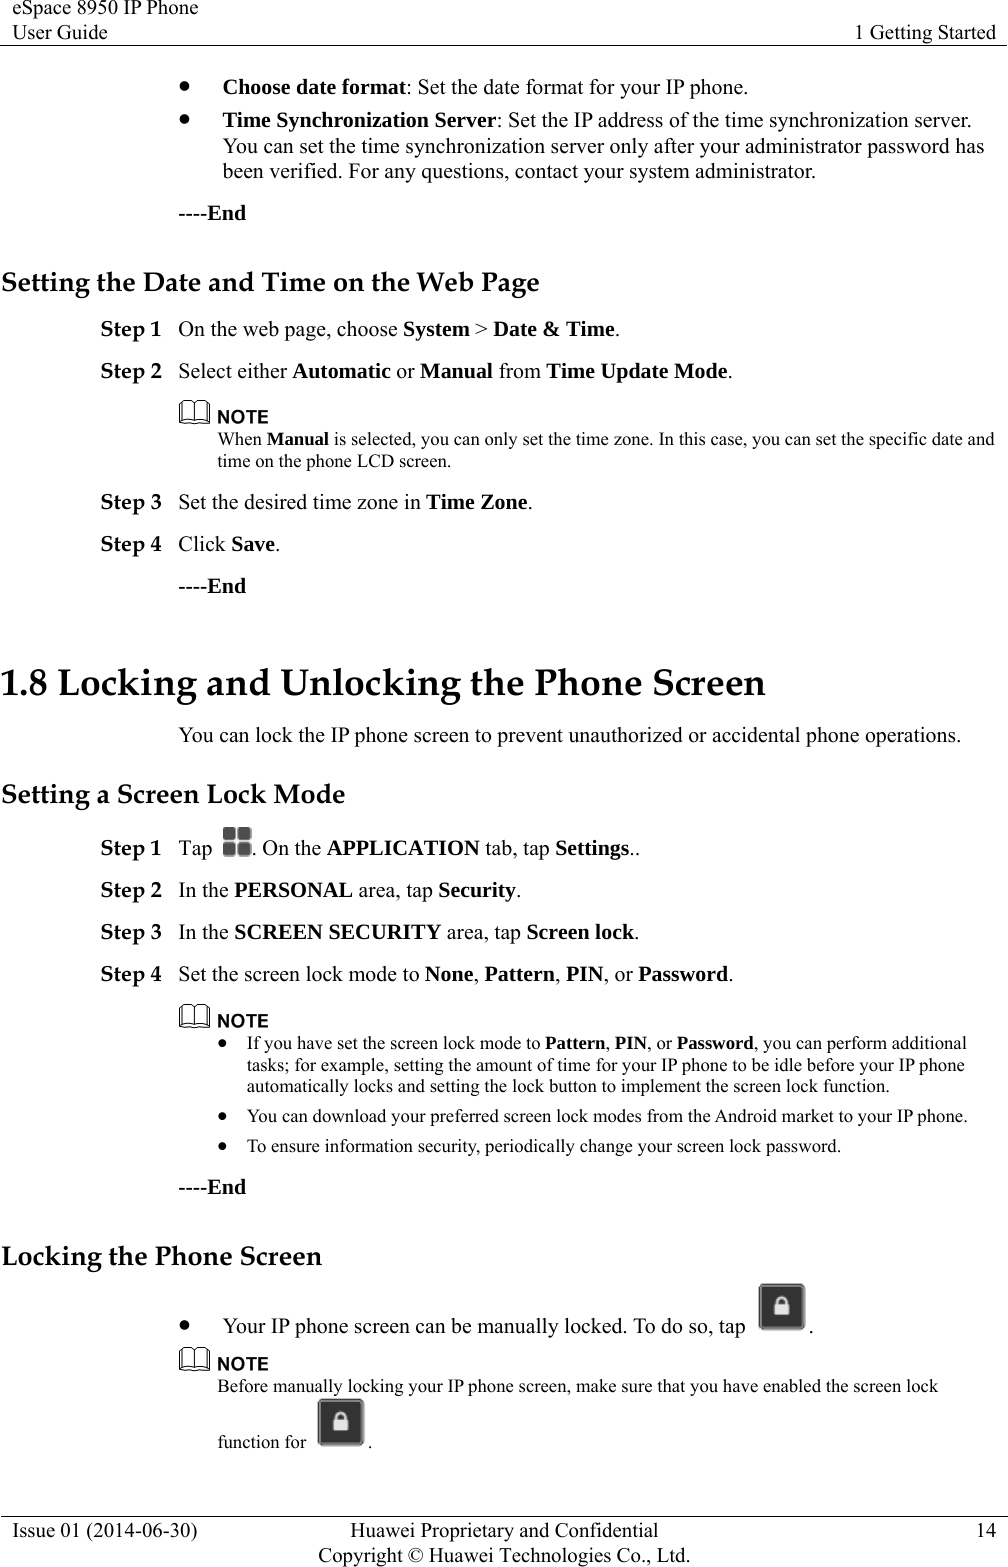 eSpace 8950 IP Phone User Guide  1 Getting Started Issue 01 (2014-06-30)  Huawei Proprietary and Confidential         Copyright © Huawei Technologies Co., Ltd.14  Choose date format: Set the date format for your IP phone.  Time Synchronization Server: Set the IP address of the time synchronization server. You can set the time synchronization server only after your administrator password has been verified. For any questions, contact your system administrator. ----End Setting the Date and Time on the Web Page Step 1 On the web page, choose System &gt; Date &amp; Time. Step 2 Select either Automatic or Manual from Time Update Mode.  When Manual is selected, you can only set the time zone. In this case, you can set the specific date and time on the phone LCD screen. Step 3 Set the desired time zone in Time Zone. Step 4 Click Save. ----End 1.8 Locking and Unlocking the Phone Screen You can lock the IP phone screen to prevent unauthorized or accidental phone operations. Setting a Screen Lock Mode Step 1 Tap  . On the APPLICATION tab, tap Settings.. Step 2 In the PERSONAL area, tap Security. Step 3 In the SCREEN SECURITY area, tap Screen lock. Step 4 Set the screen lock mode to None, Pattern, PIN, or Password.   If you have set the screen lock mode to Pattern, PIN, or Password, you can perform additional tasks; for example, setting the amount of time for your IP phone to be idle before your IP phone automatically locks and setting the lock button to implement the screen lock function.  You can download your preferred screen lock modes from the Android market to your IP phone.  To ensure information security, periodically change your screen lock password. ----End Locking the Phone Screen  Your IP phone screen can be manually locked. To do so, tap  .  Before manually locking your IP phone screen, make sure that you have enabled the screen lock function for  . 